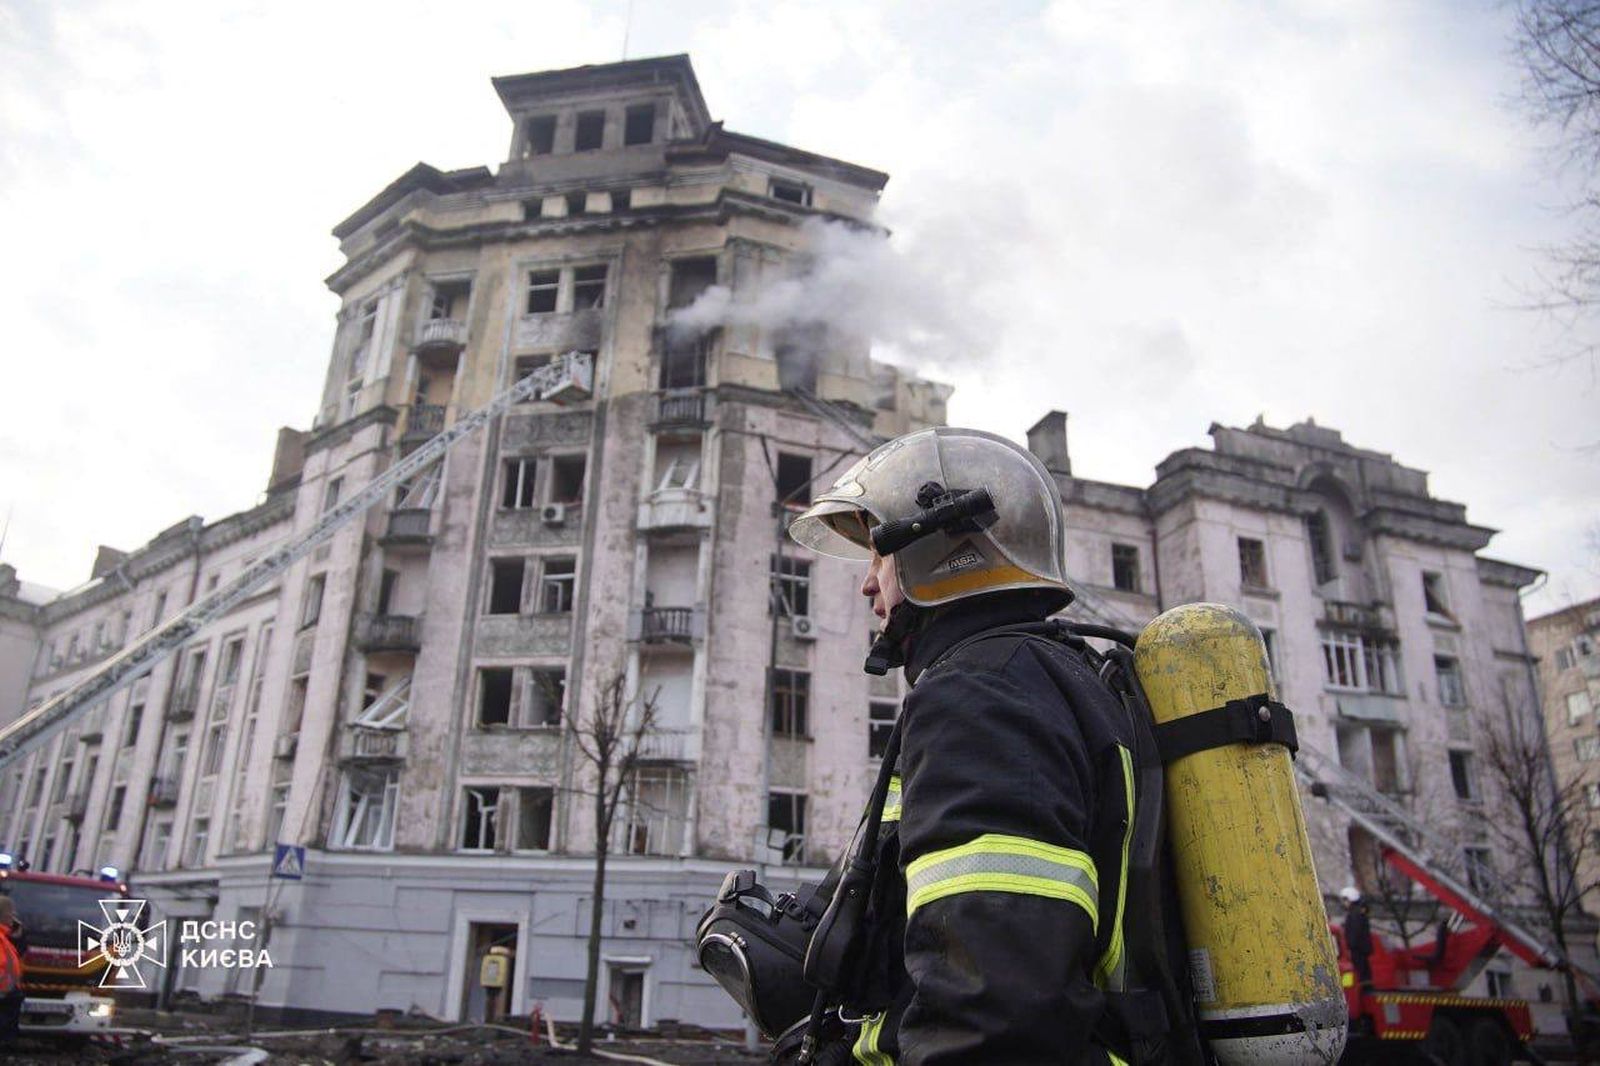 KYIV, UKRAINE - MARCH 21: (----EDITORIAL USE ONLY - MANDATORY CREDIT - 'UKRAINIAN STATE EMERGENCY SERVICE / HANDOUT' - NO MARKETING NO ADVERTISING CAMPAIGNS - DISTRIBUTED AS A SERVICE TO CLIENTS----) Firefighters try to extinguish the fire after a fire broke out residential buildings and conduct search and rescue operations after Russian attacks in Kyiv, Ukraine on March 21, 2024. As a result of Russia's attacks on the capital Kyiv, explosions occurred in Podilsk, Shevchenkiv and Sviatoshyn regions. As a result of the attack, residential areas, warehouses and a substation caught fire in the Podilsk region. 177 firefighters and 38 vehicles were used to extinguish the fires in the region. According to preliminary information, 10 people, including 1 child, were injured as a result of the attack, while 79 people were evacuated from the damaged areas. Ukraine State Emergency Service / Handout / Anadolu,Image: 858442321, License: Rights-managed, Restrictions: ***
HANDOUT image or SOCIAL MEDIA IMAGE or FILMSTILL for EDITORIAL USE ONLY! * Please note: Fees charged by Profimedia are for the Profimedia's services only, and do not, nor are they intended to, convey to the user any ownership of Copyright or License in the material. Profimedia does not claim any ownership including but not limited to Copyright or License in the attached material. By publishing this material you (the user) expressly agree to indemnify and to hold Profimedia and its directors, shareholders and employees harmless from any loss, claims, damages, demands, expenses (including legal fees), or any causes of action or allegation against Profimedia arising out of or connected in any way with publication of the material. Profimedia does not claim any copyright or license in the attached materials. Any downloading fees charged by Profimedia are for Profimedia's services only. * Handling Fee Only 
***, Model Release: no, Credit line: Ukraine State Emergency Service / AFP / Profimedia